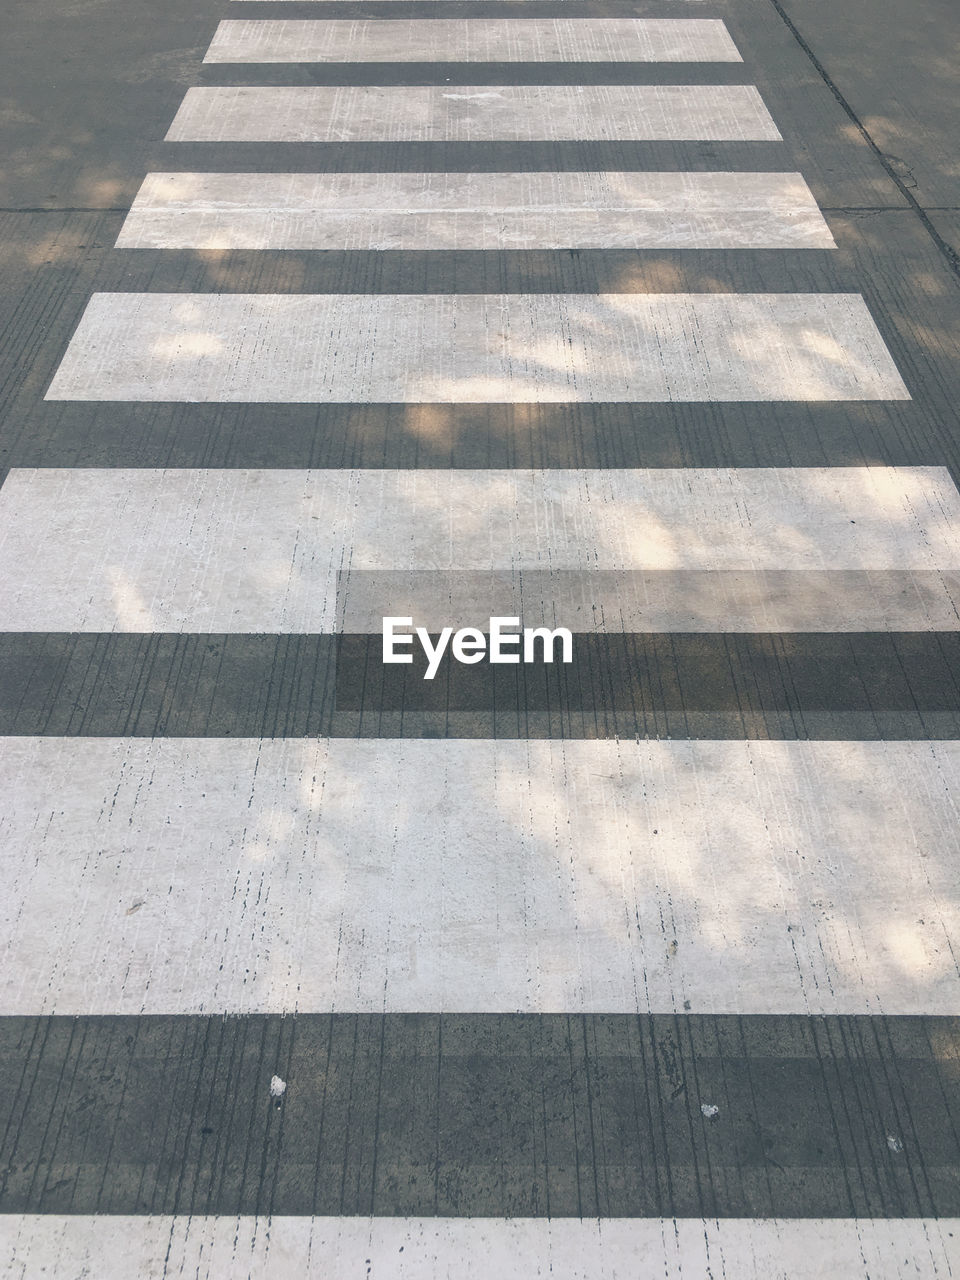 HIGH ANGLE VIEW OF ZEBRA CROSSING ON FOOTPATH